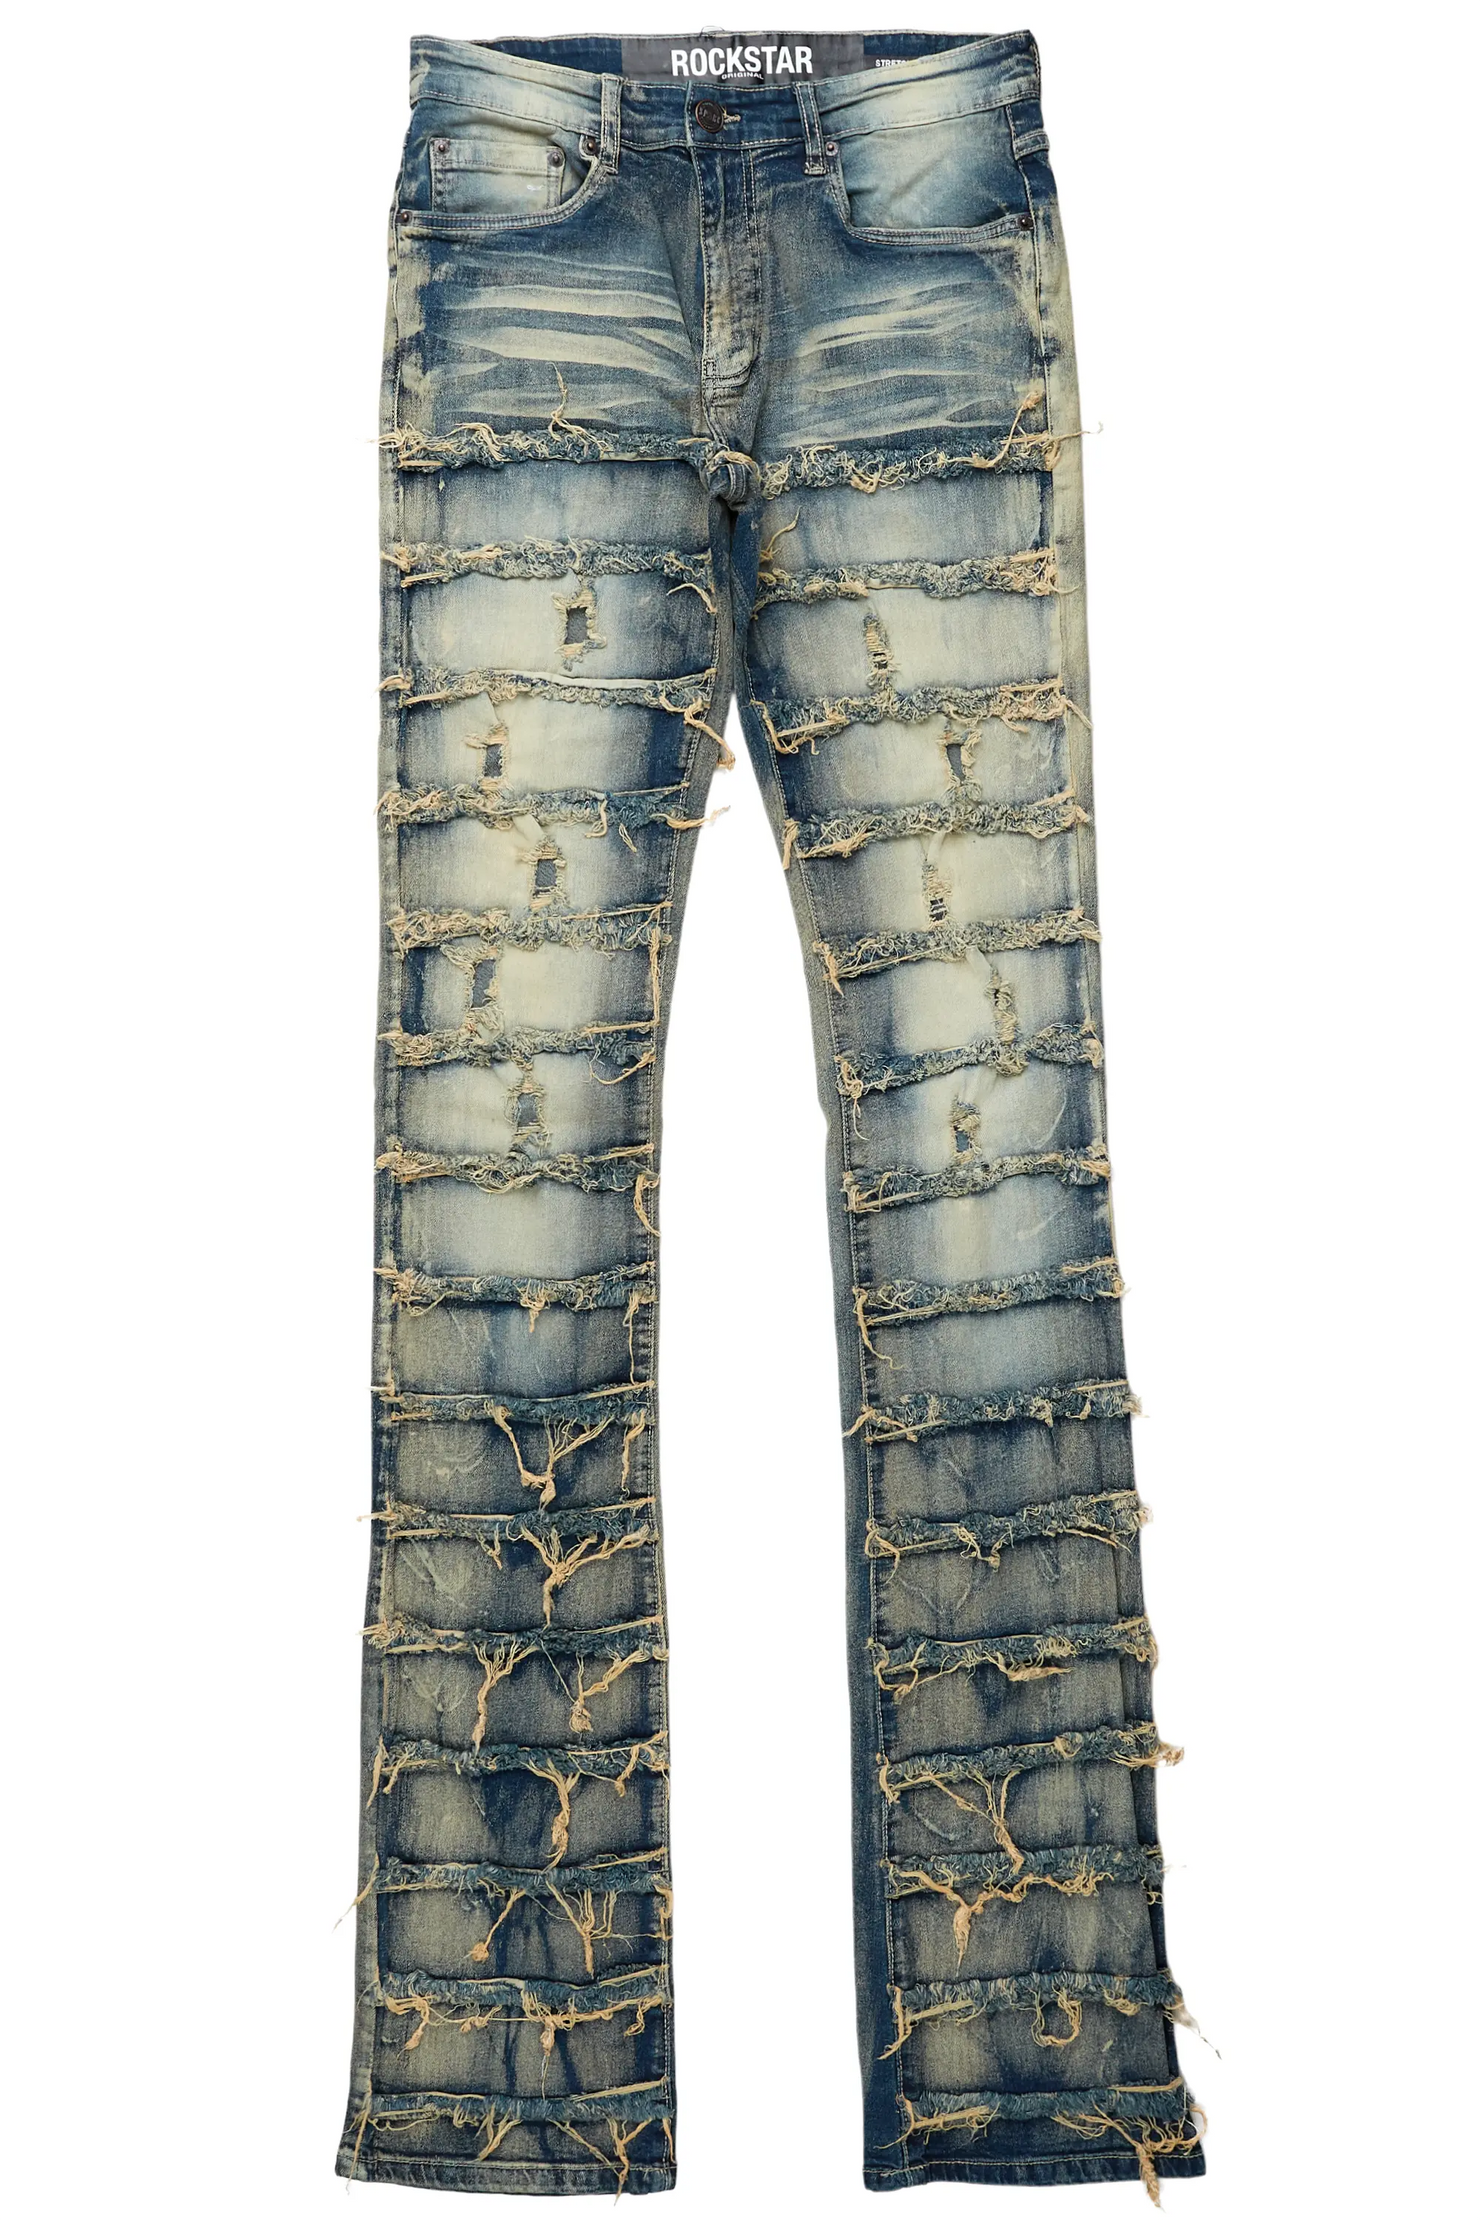 Waylon Rustic Blue Frayed Super Stacked Flare Jean